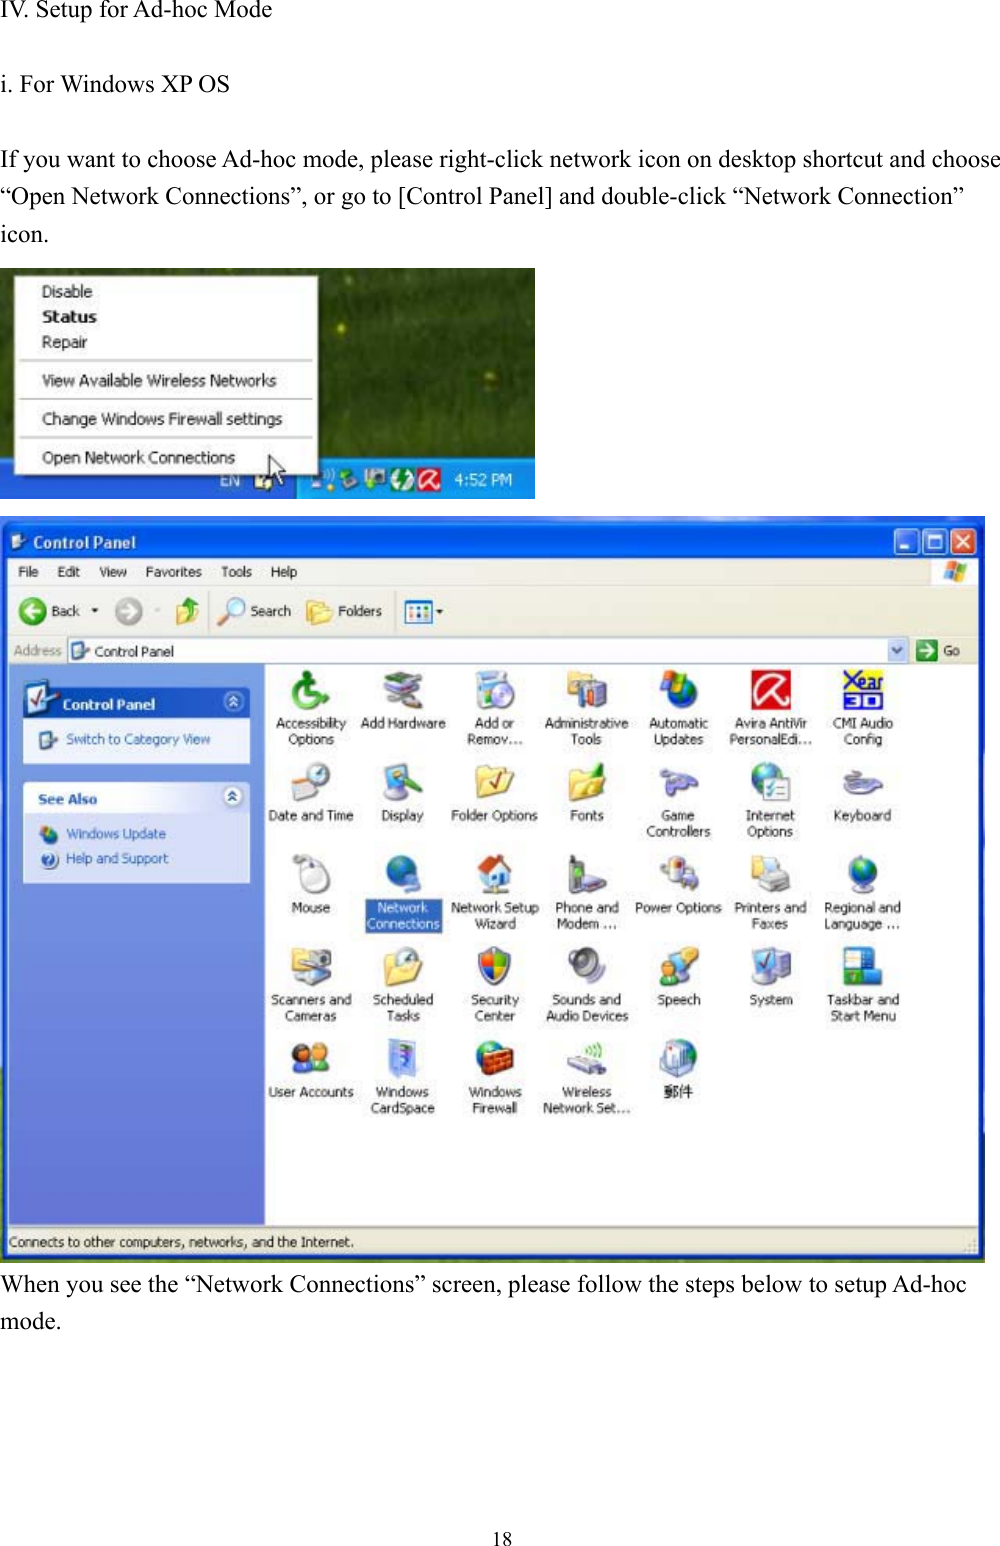 18IV. Setup for Ad-hoc Mode i. For Windows XP OS If you want to choose Ad-hoc mode, please right-click network icon on desktop shortcut and choose “Open Network Connections”, or go to [Control Panel] and double-click “Network Connection” icon.When you see the “Network Connections” screen, please follow the steps below to setup Ad-hoc mode.